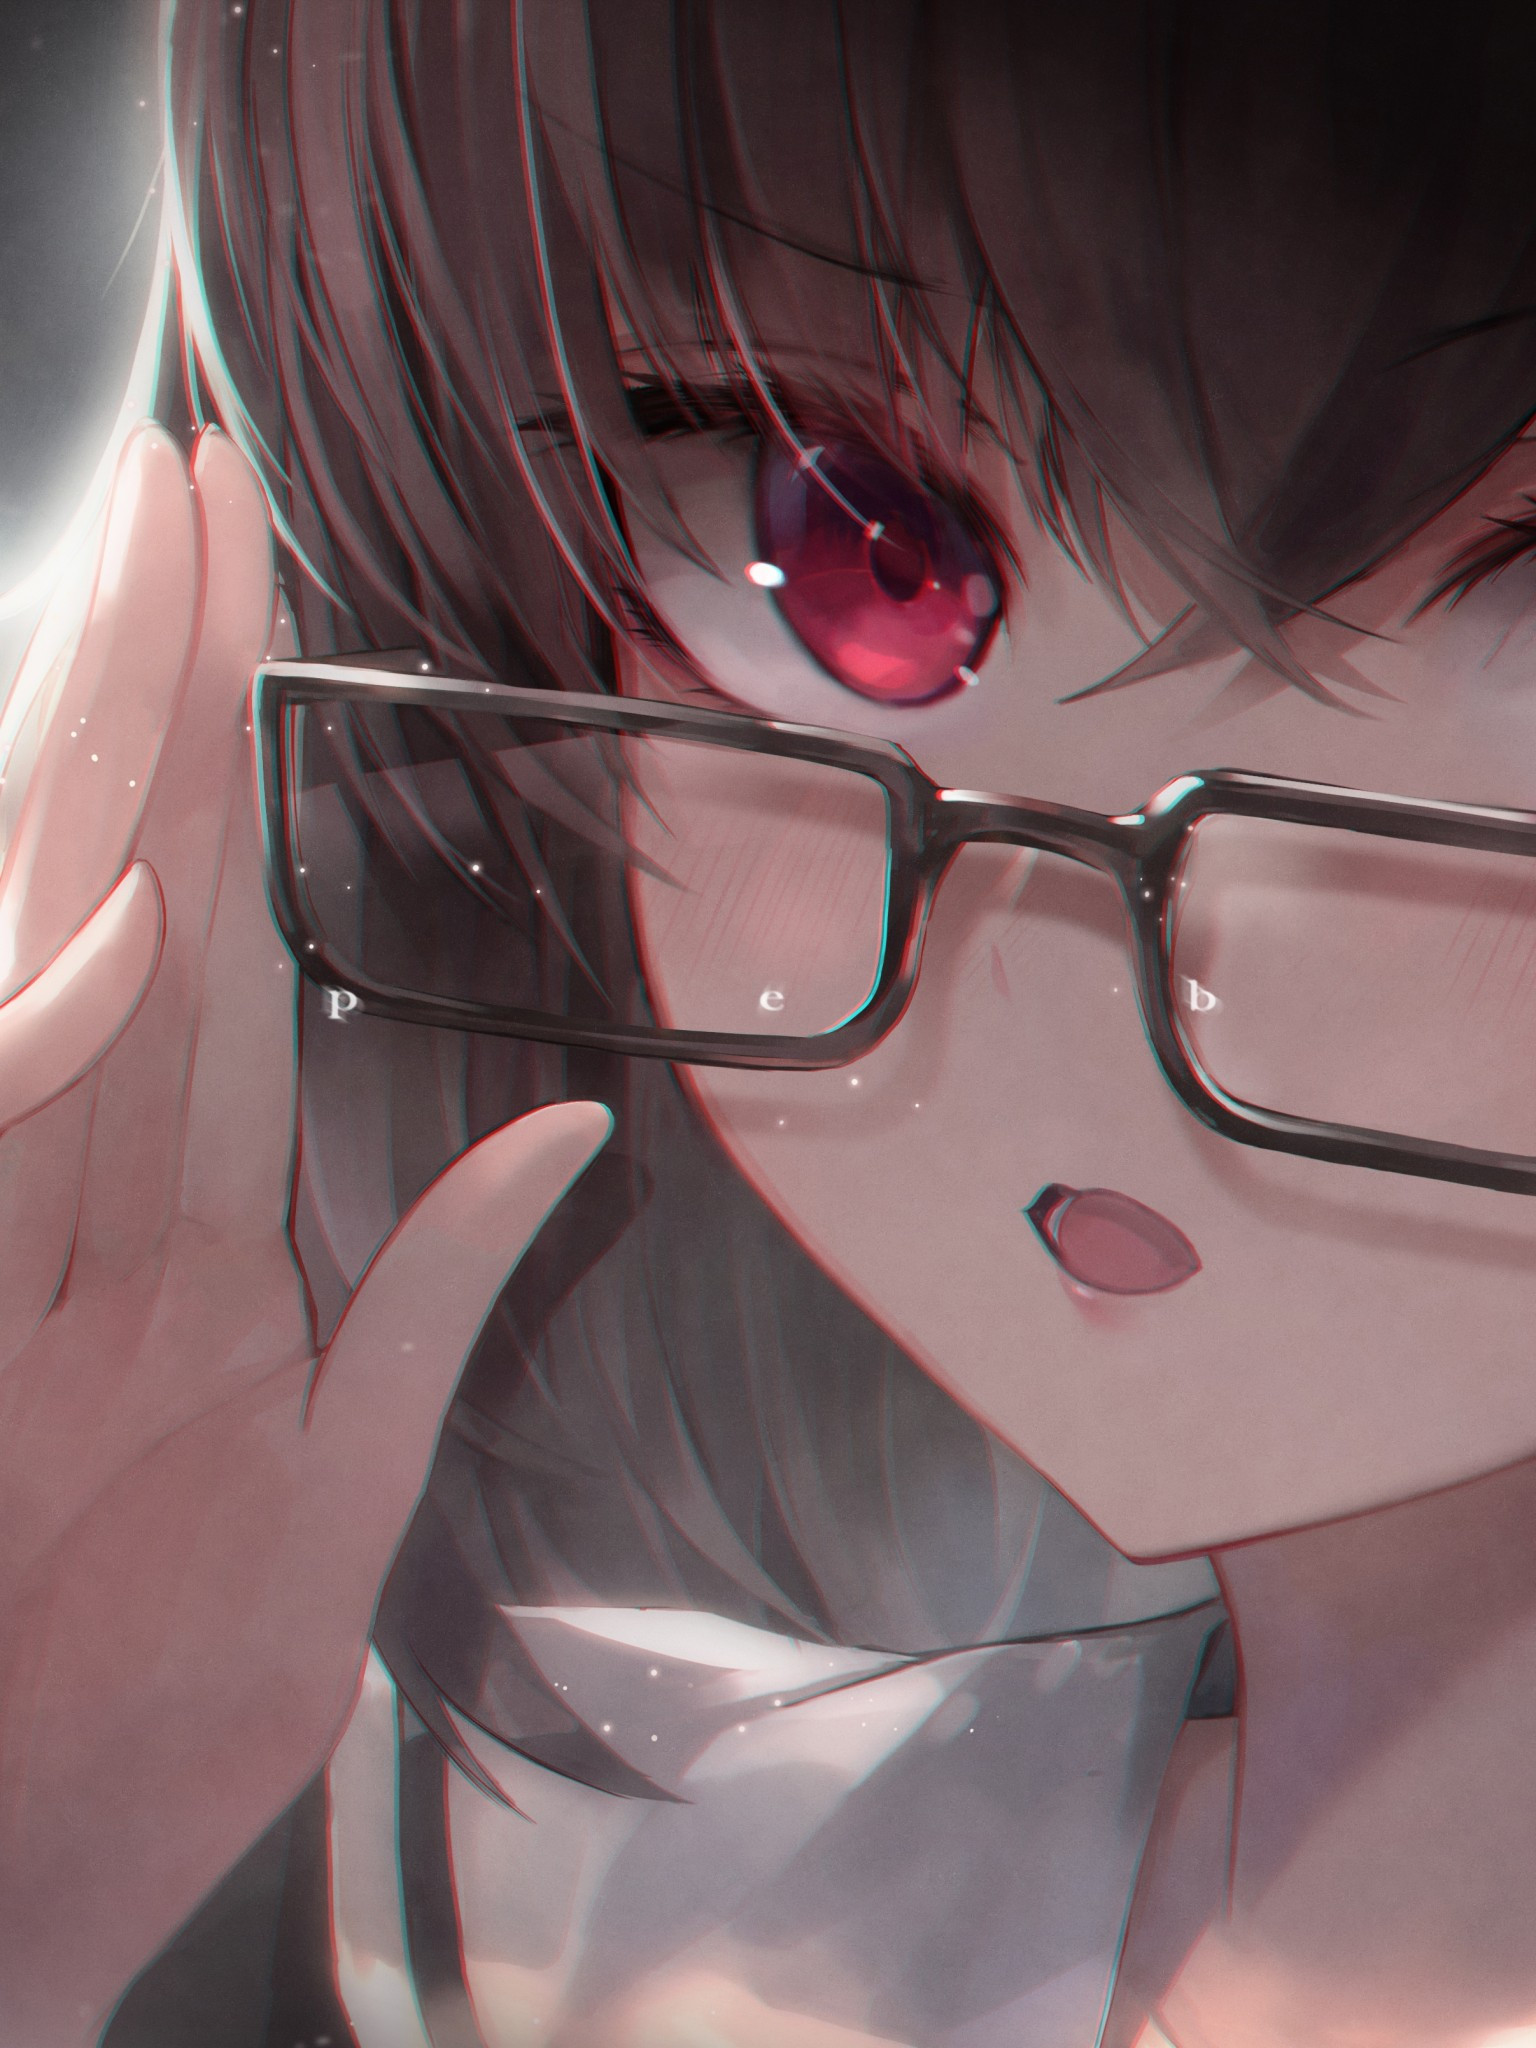 Anime Red Eyes Wallpapers